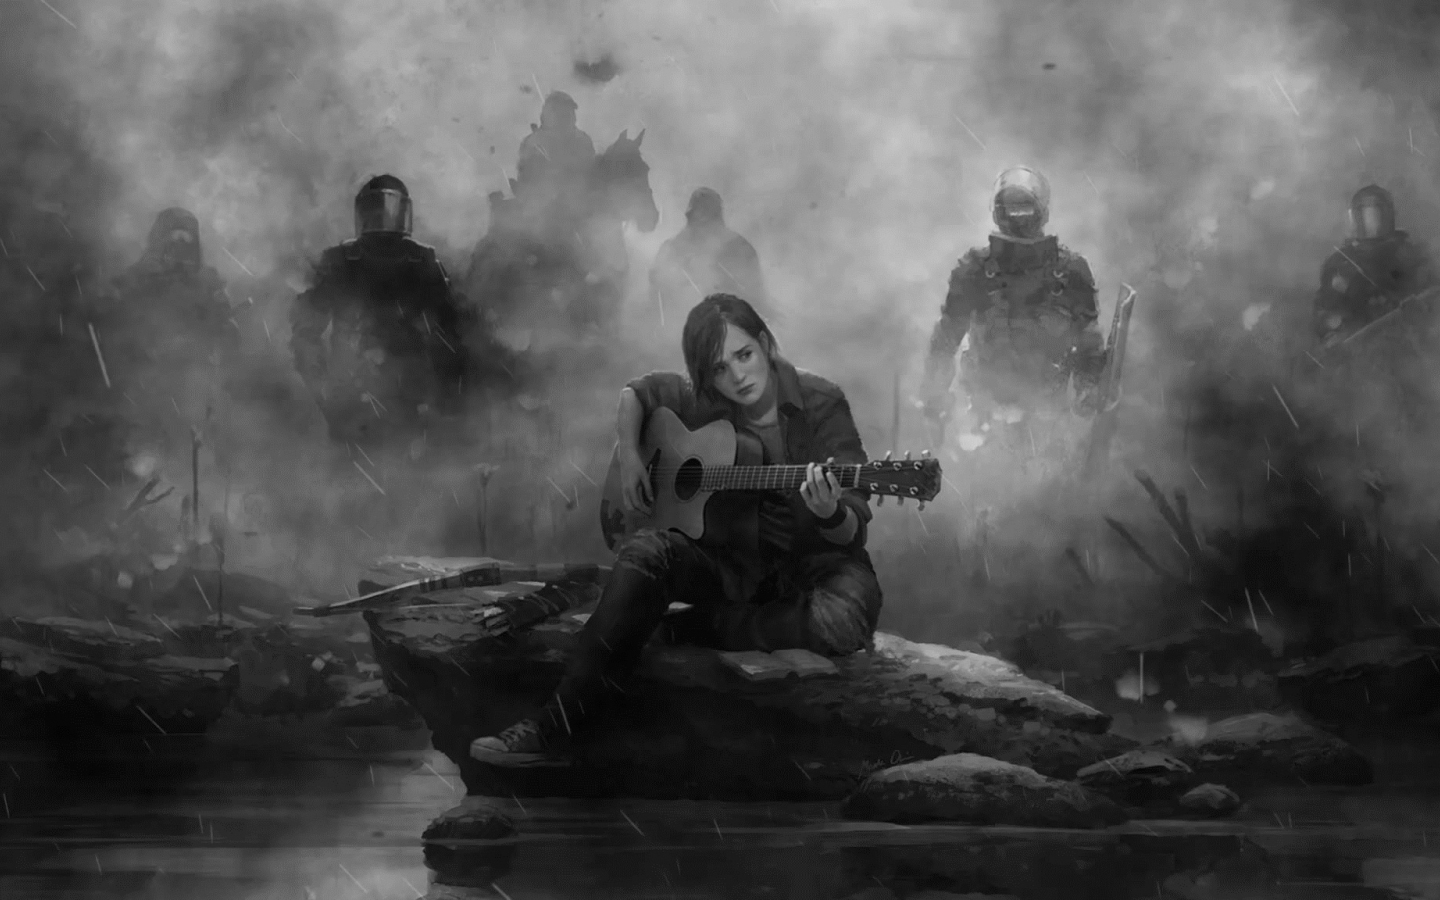 Download 1440x900 Wallpaper Video Game Bw Monochrome The Last Of Us 2 Guitar Play Widescreen 16 10 Widescreen 1440x900 Hd Image Background 162